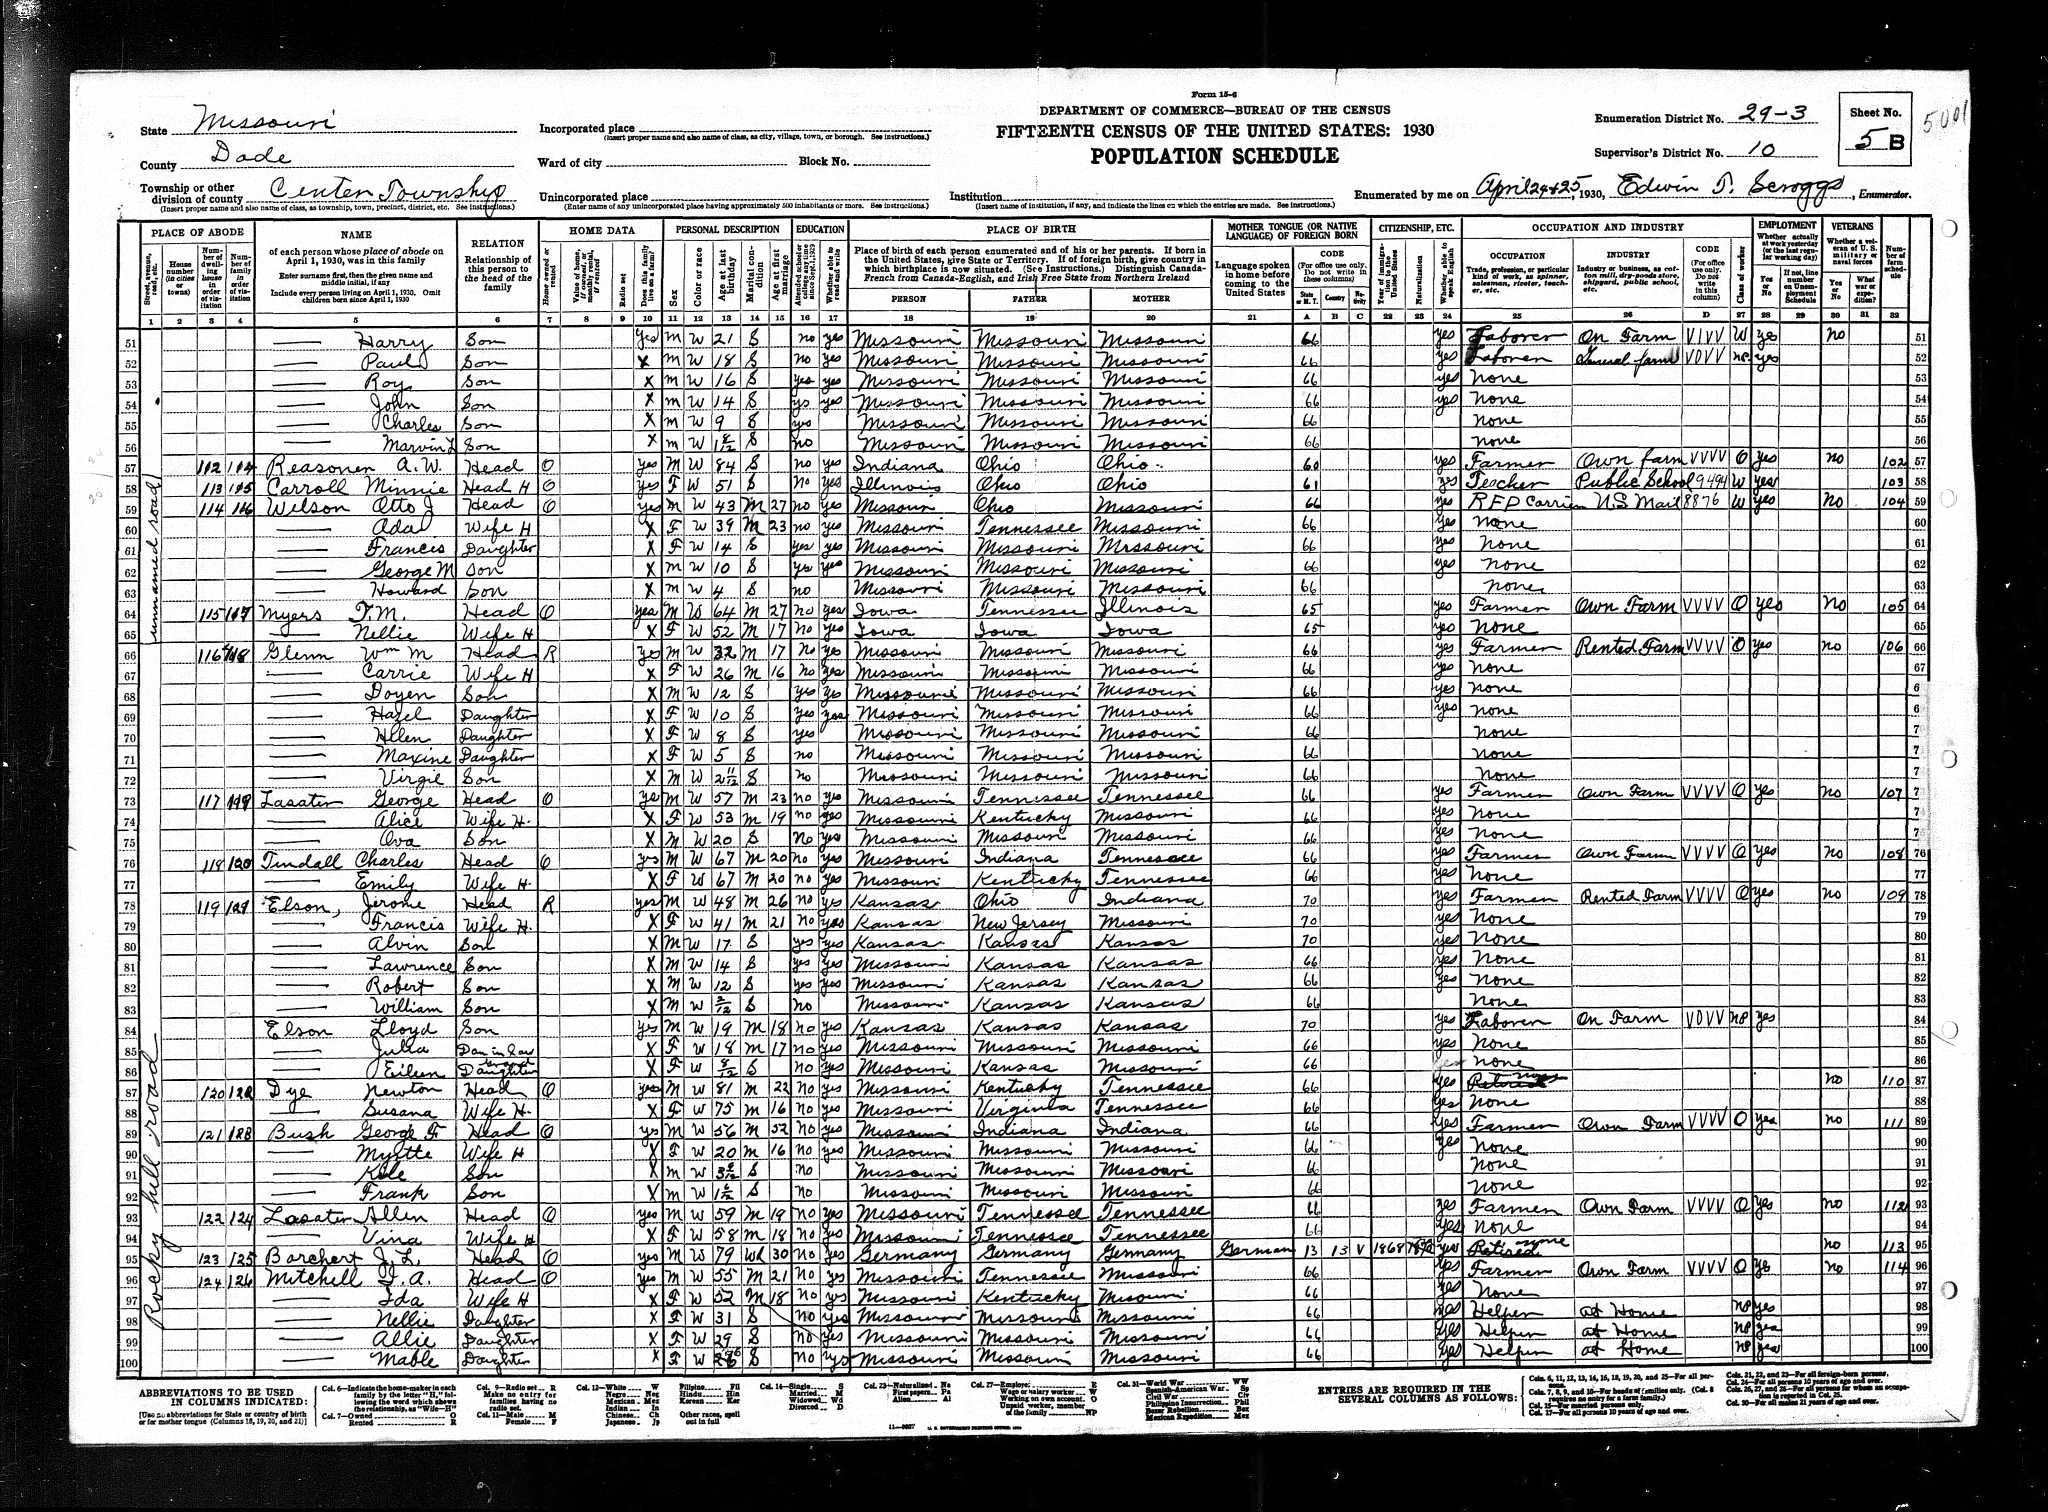 Allen S. and Vina (Rodgers) Lasater, 1930 Dade County, Missouri, census